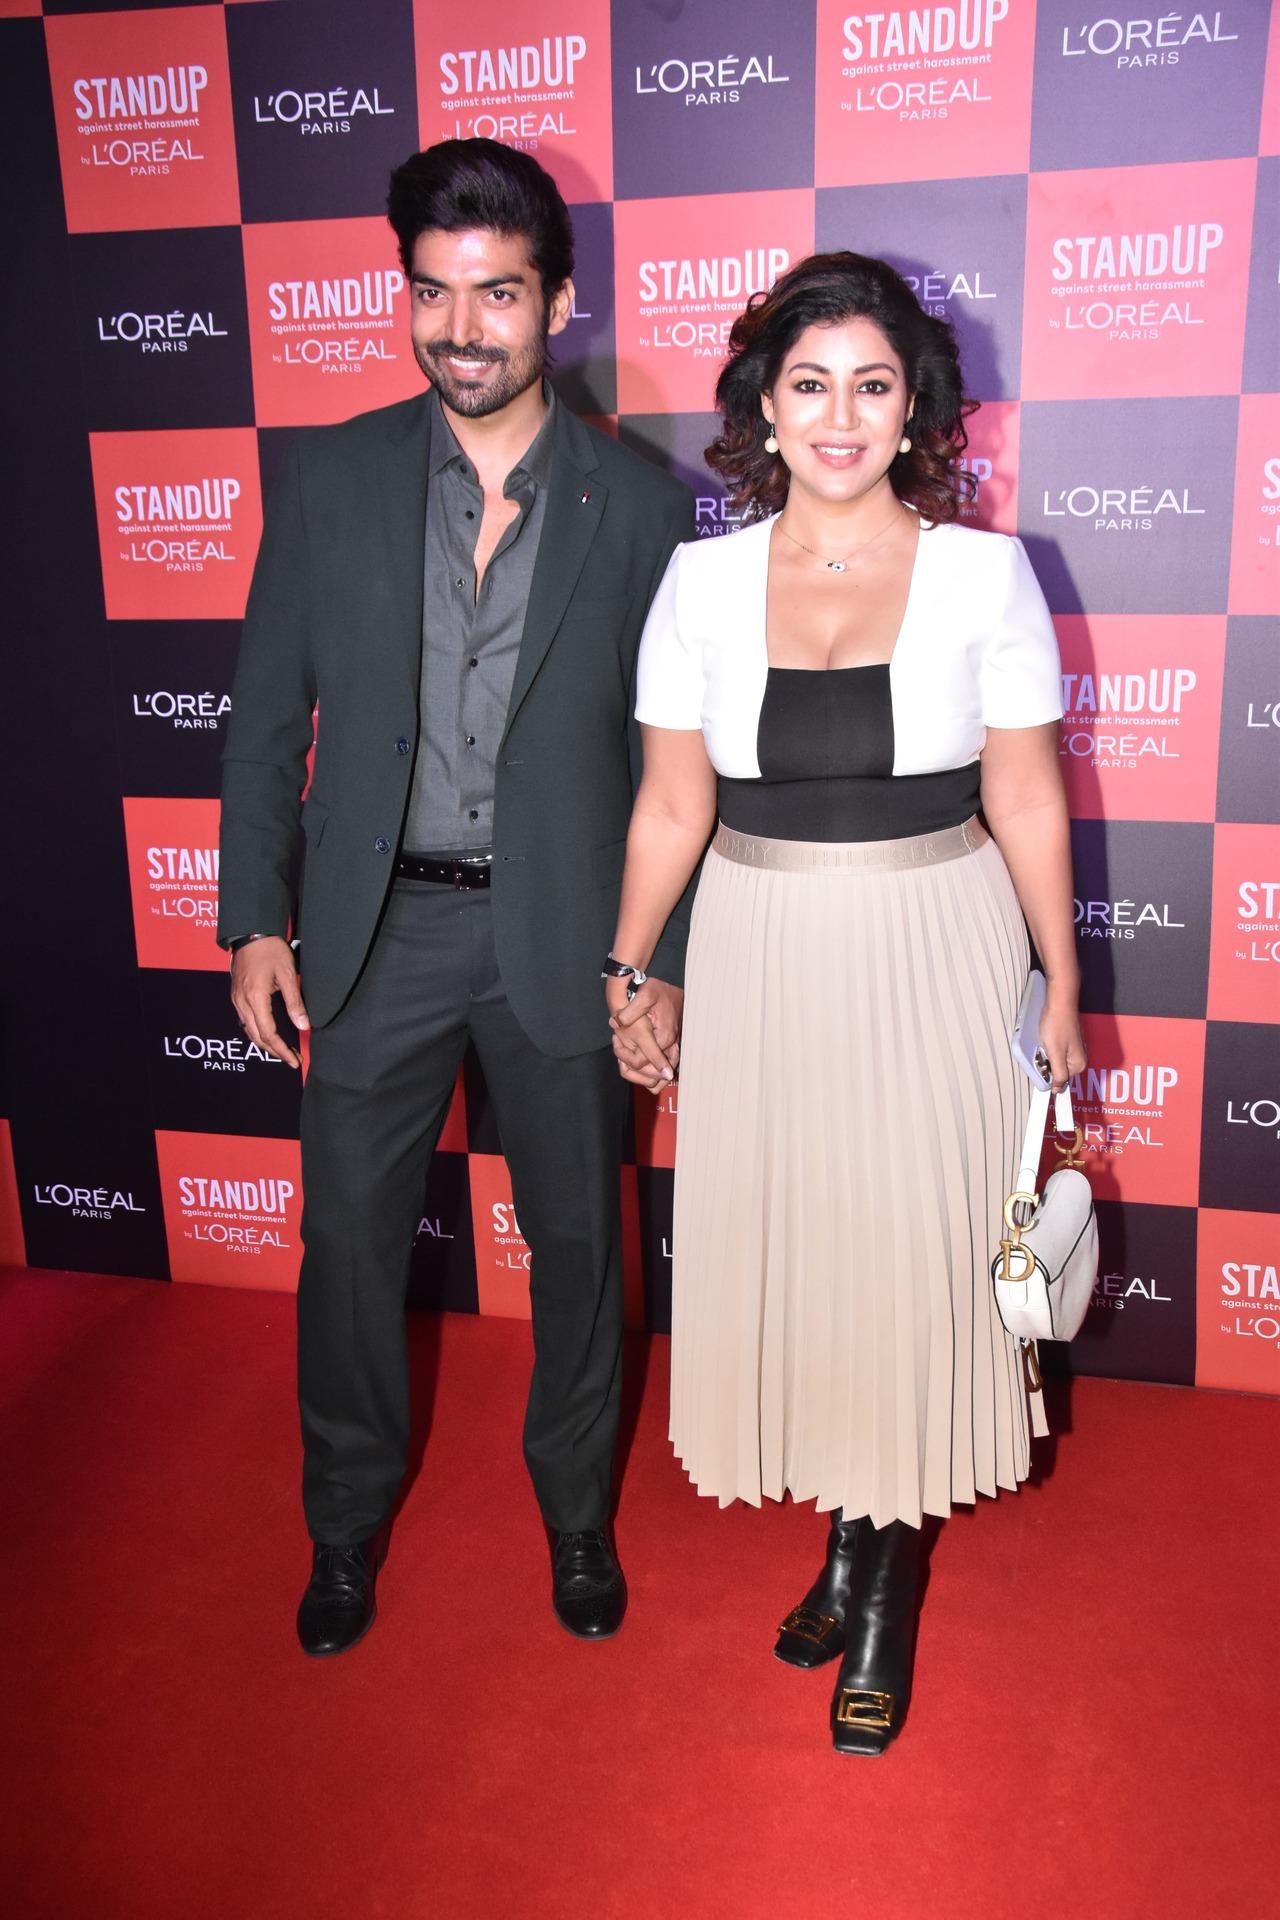 Gurmeet Choudhary and Debina Bonnerjee were all smiles as they walked hand-in-hand for the event